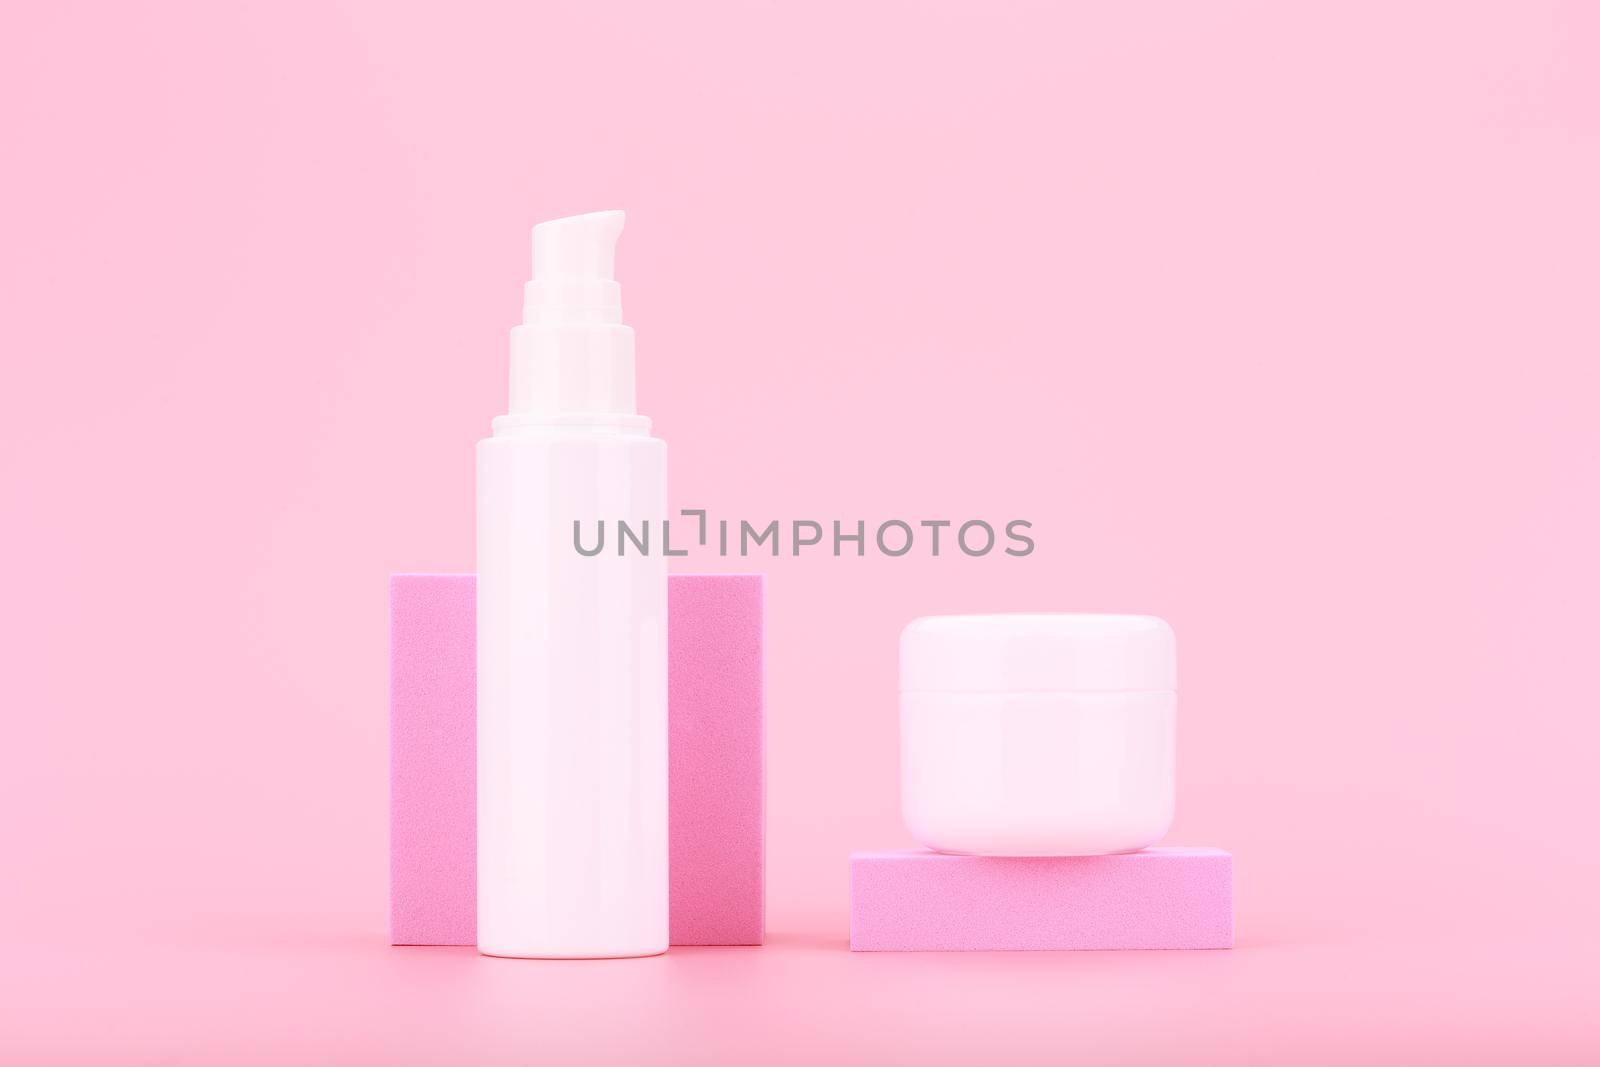 Face cream or lotion and under eye gel or cream against pink background. Concept of cosmetics for daily skin care by Senorina_Irina